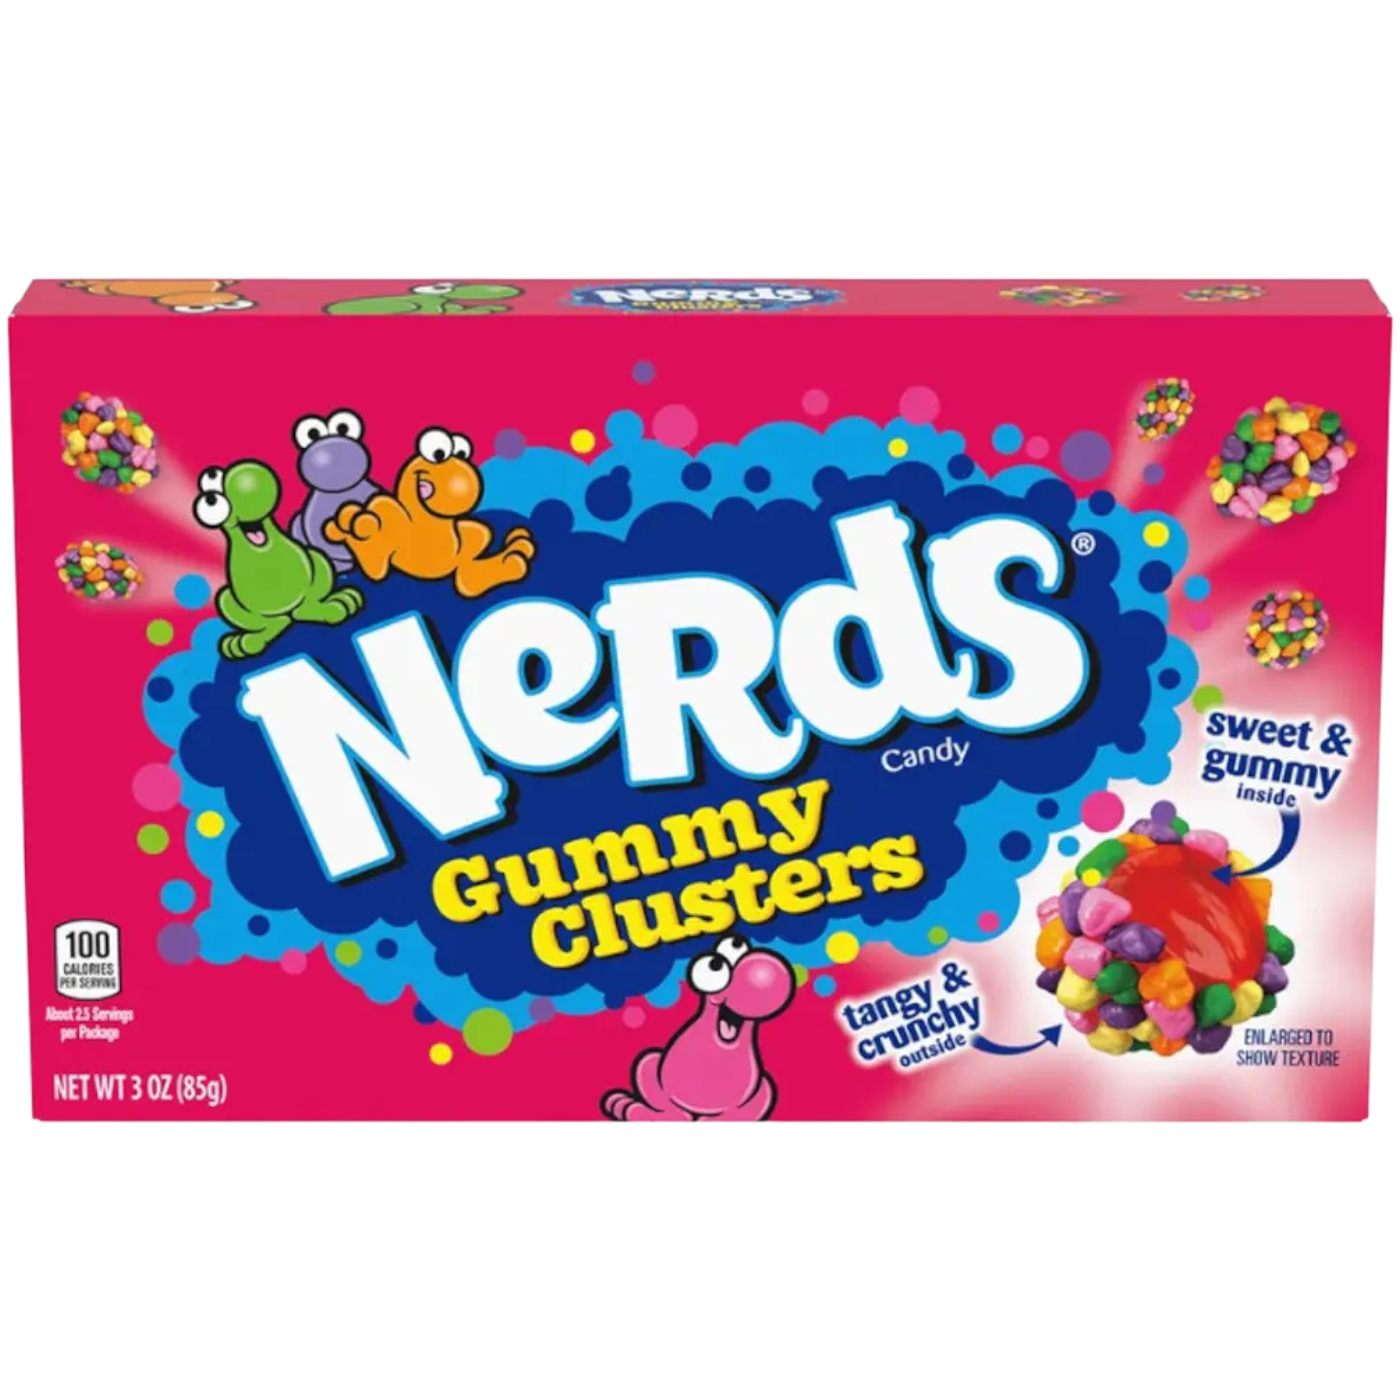 Image of Nerds Gummy Clusters Theatre Box - 3oz (85g) ENLARGED TO SHOW TEXTURE 